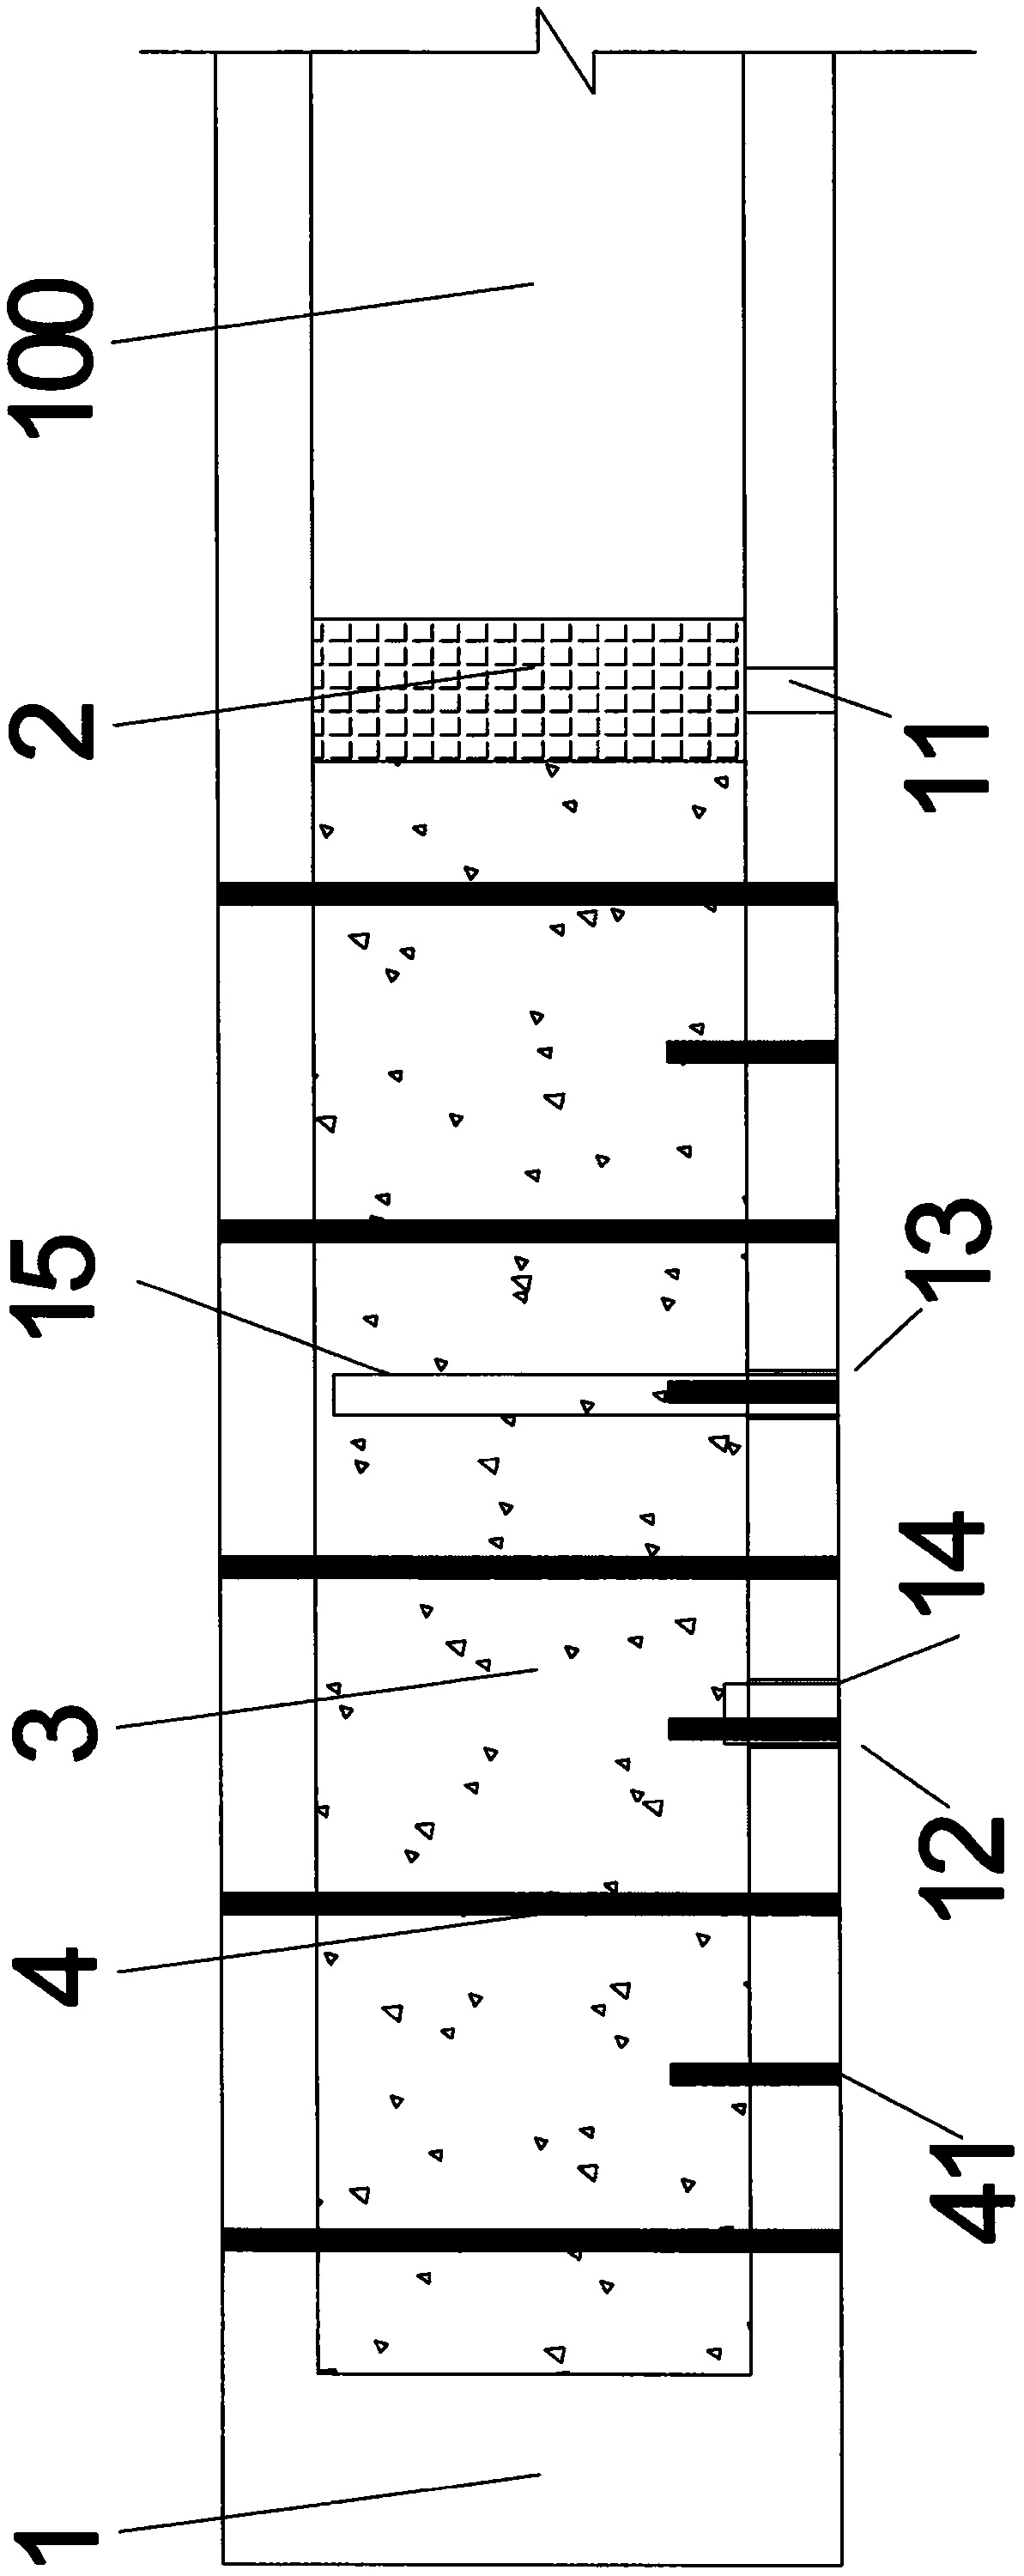 Shear-resistant reinforcing method for small-section hollow beam